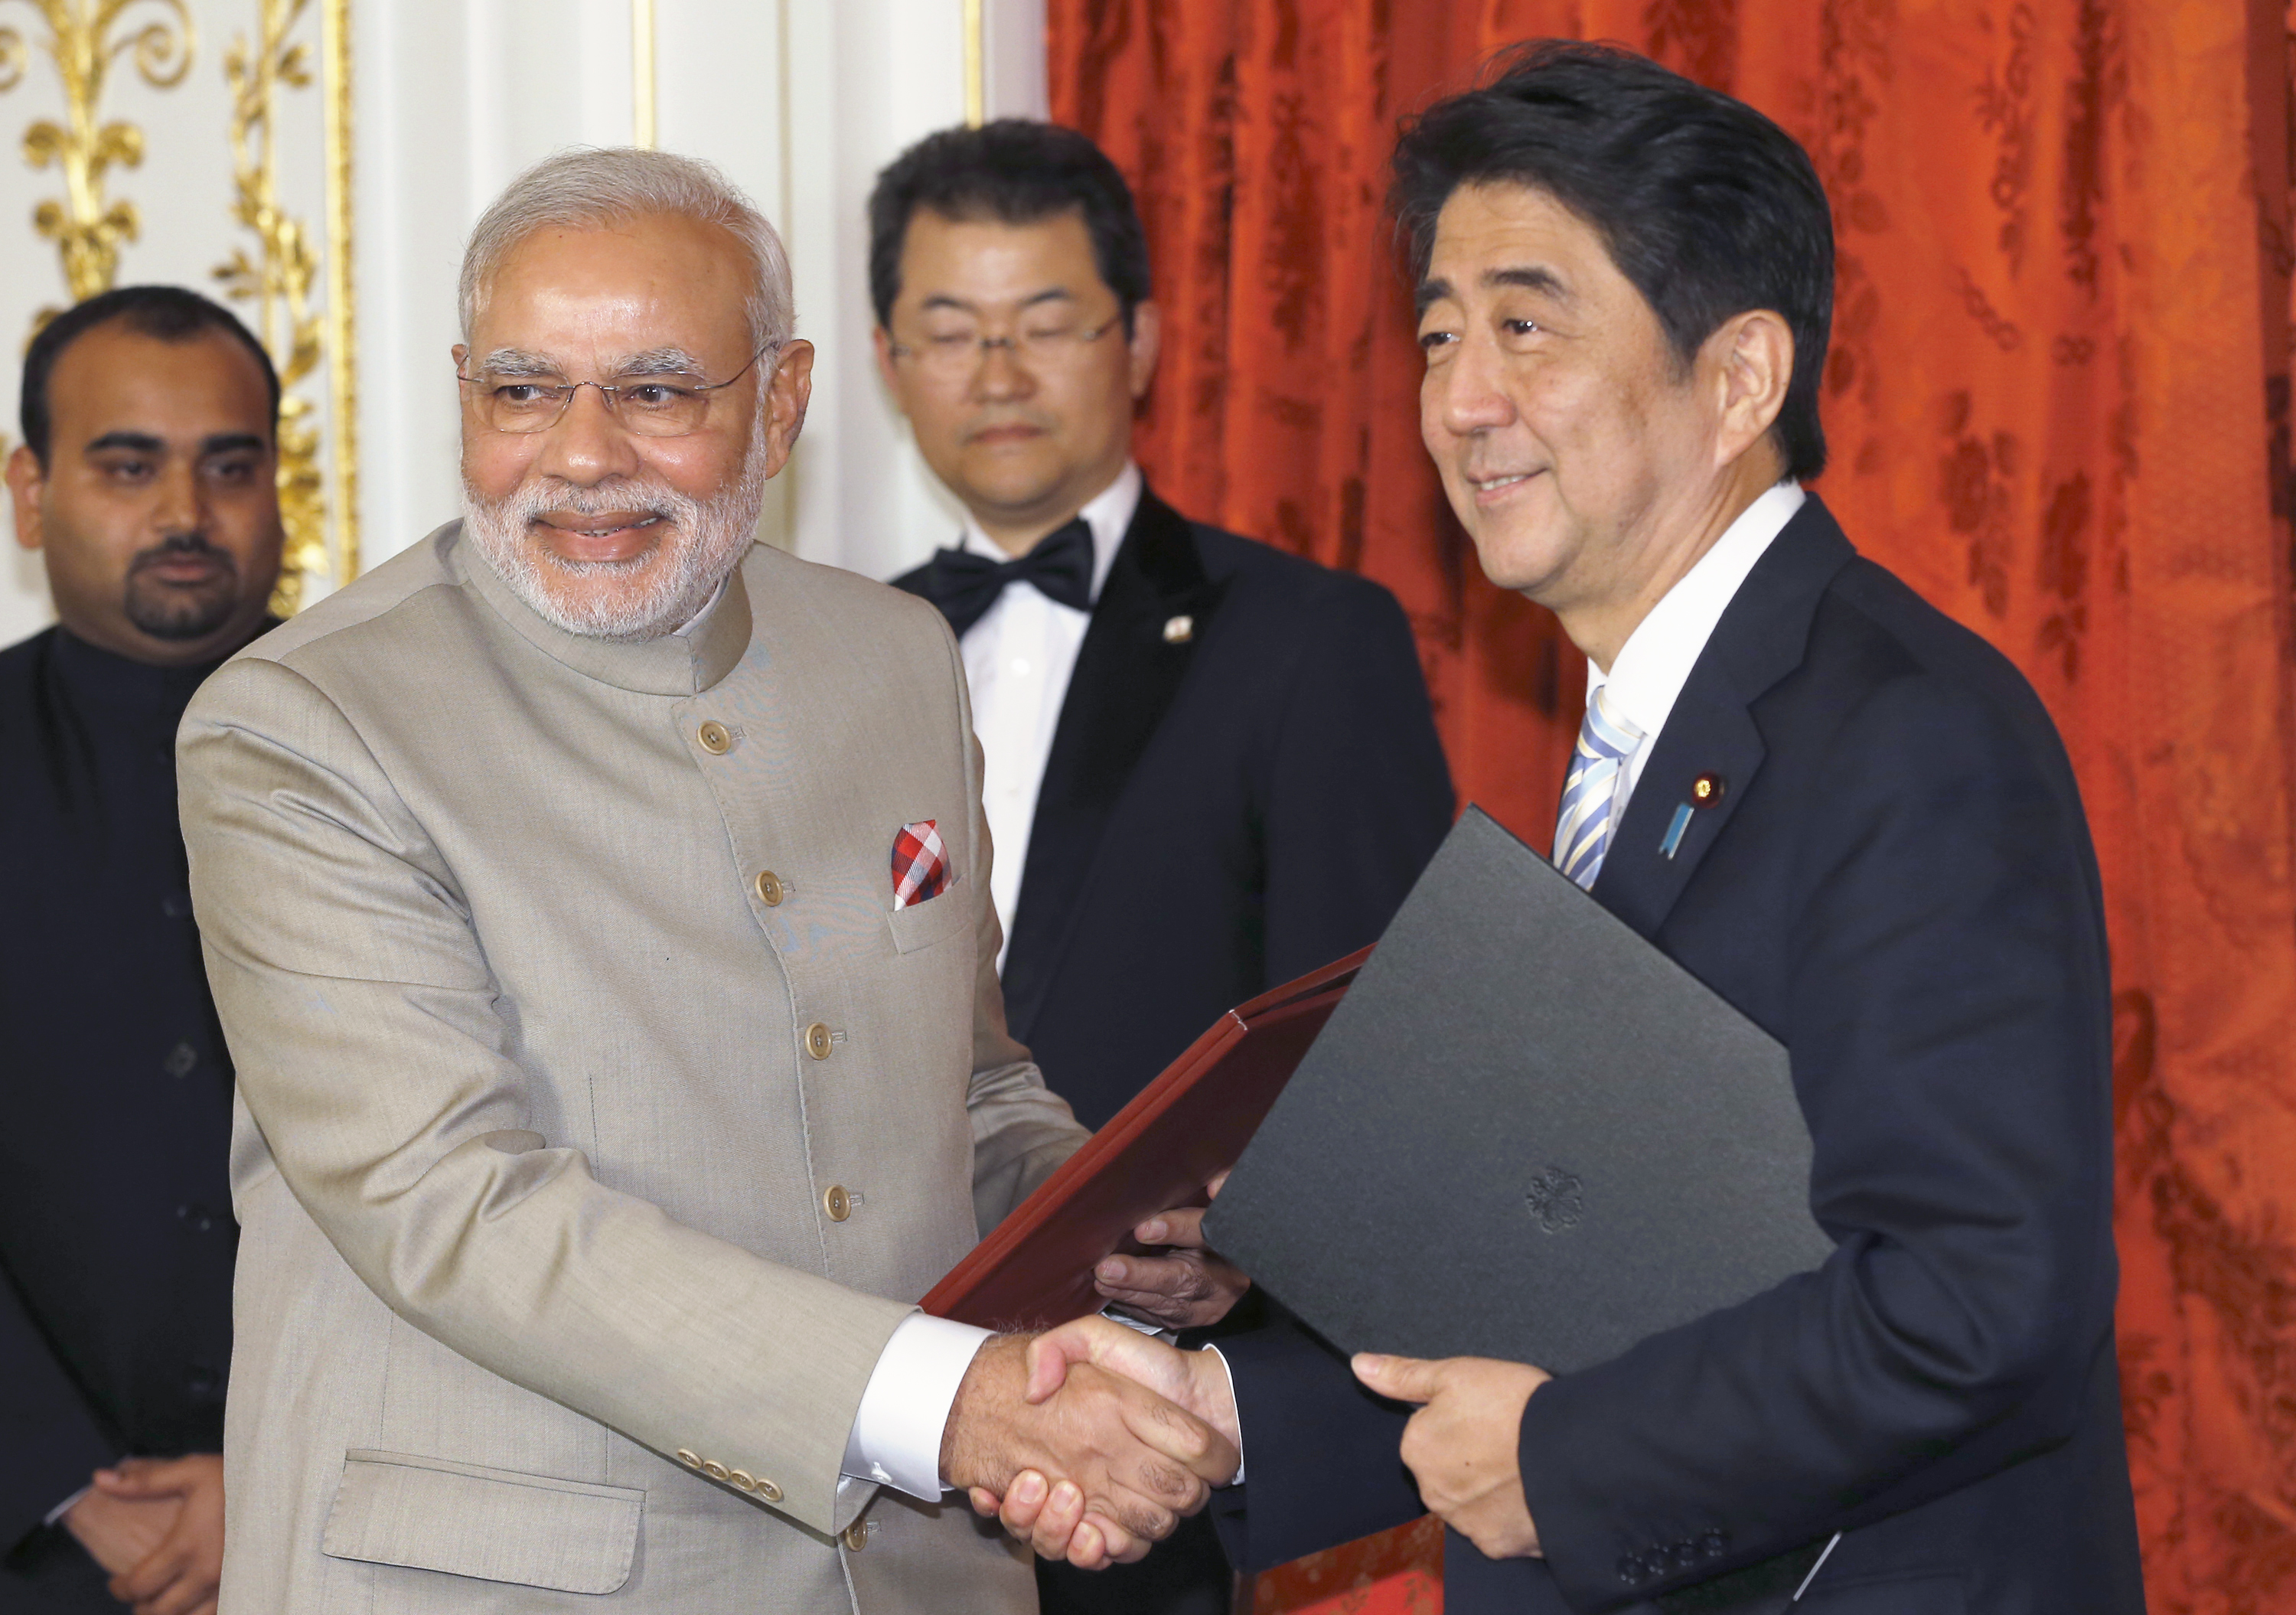 India's PM Modi shakes hands with Japan's PM Abe during a signing ceremony at the state guest house in Tokyo